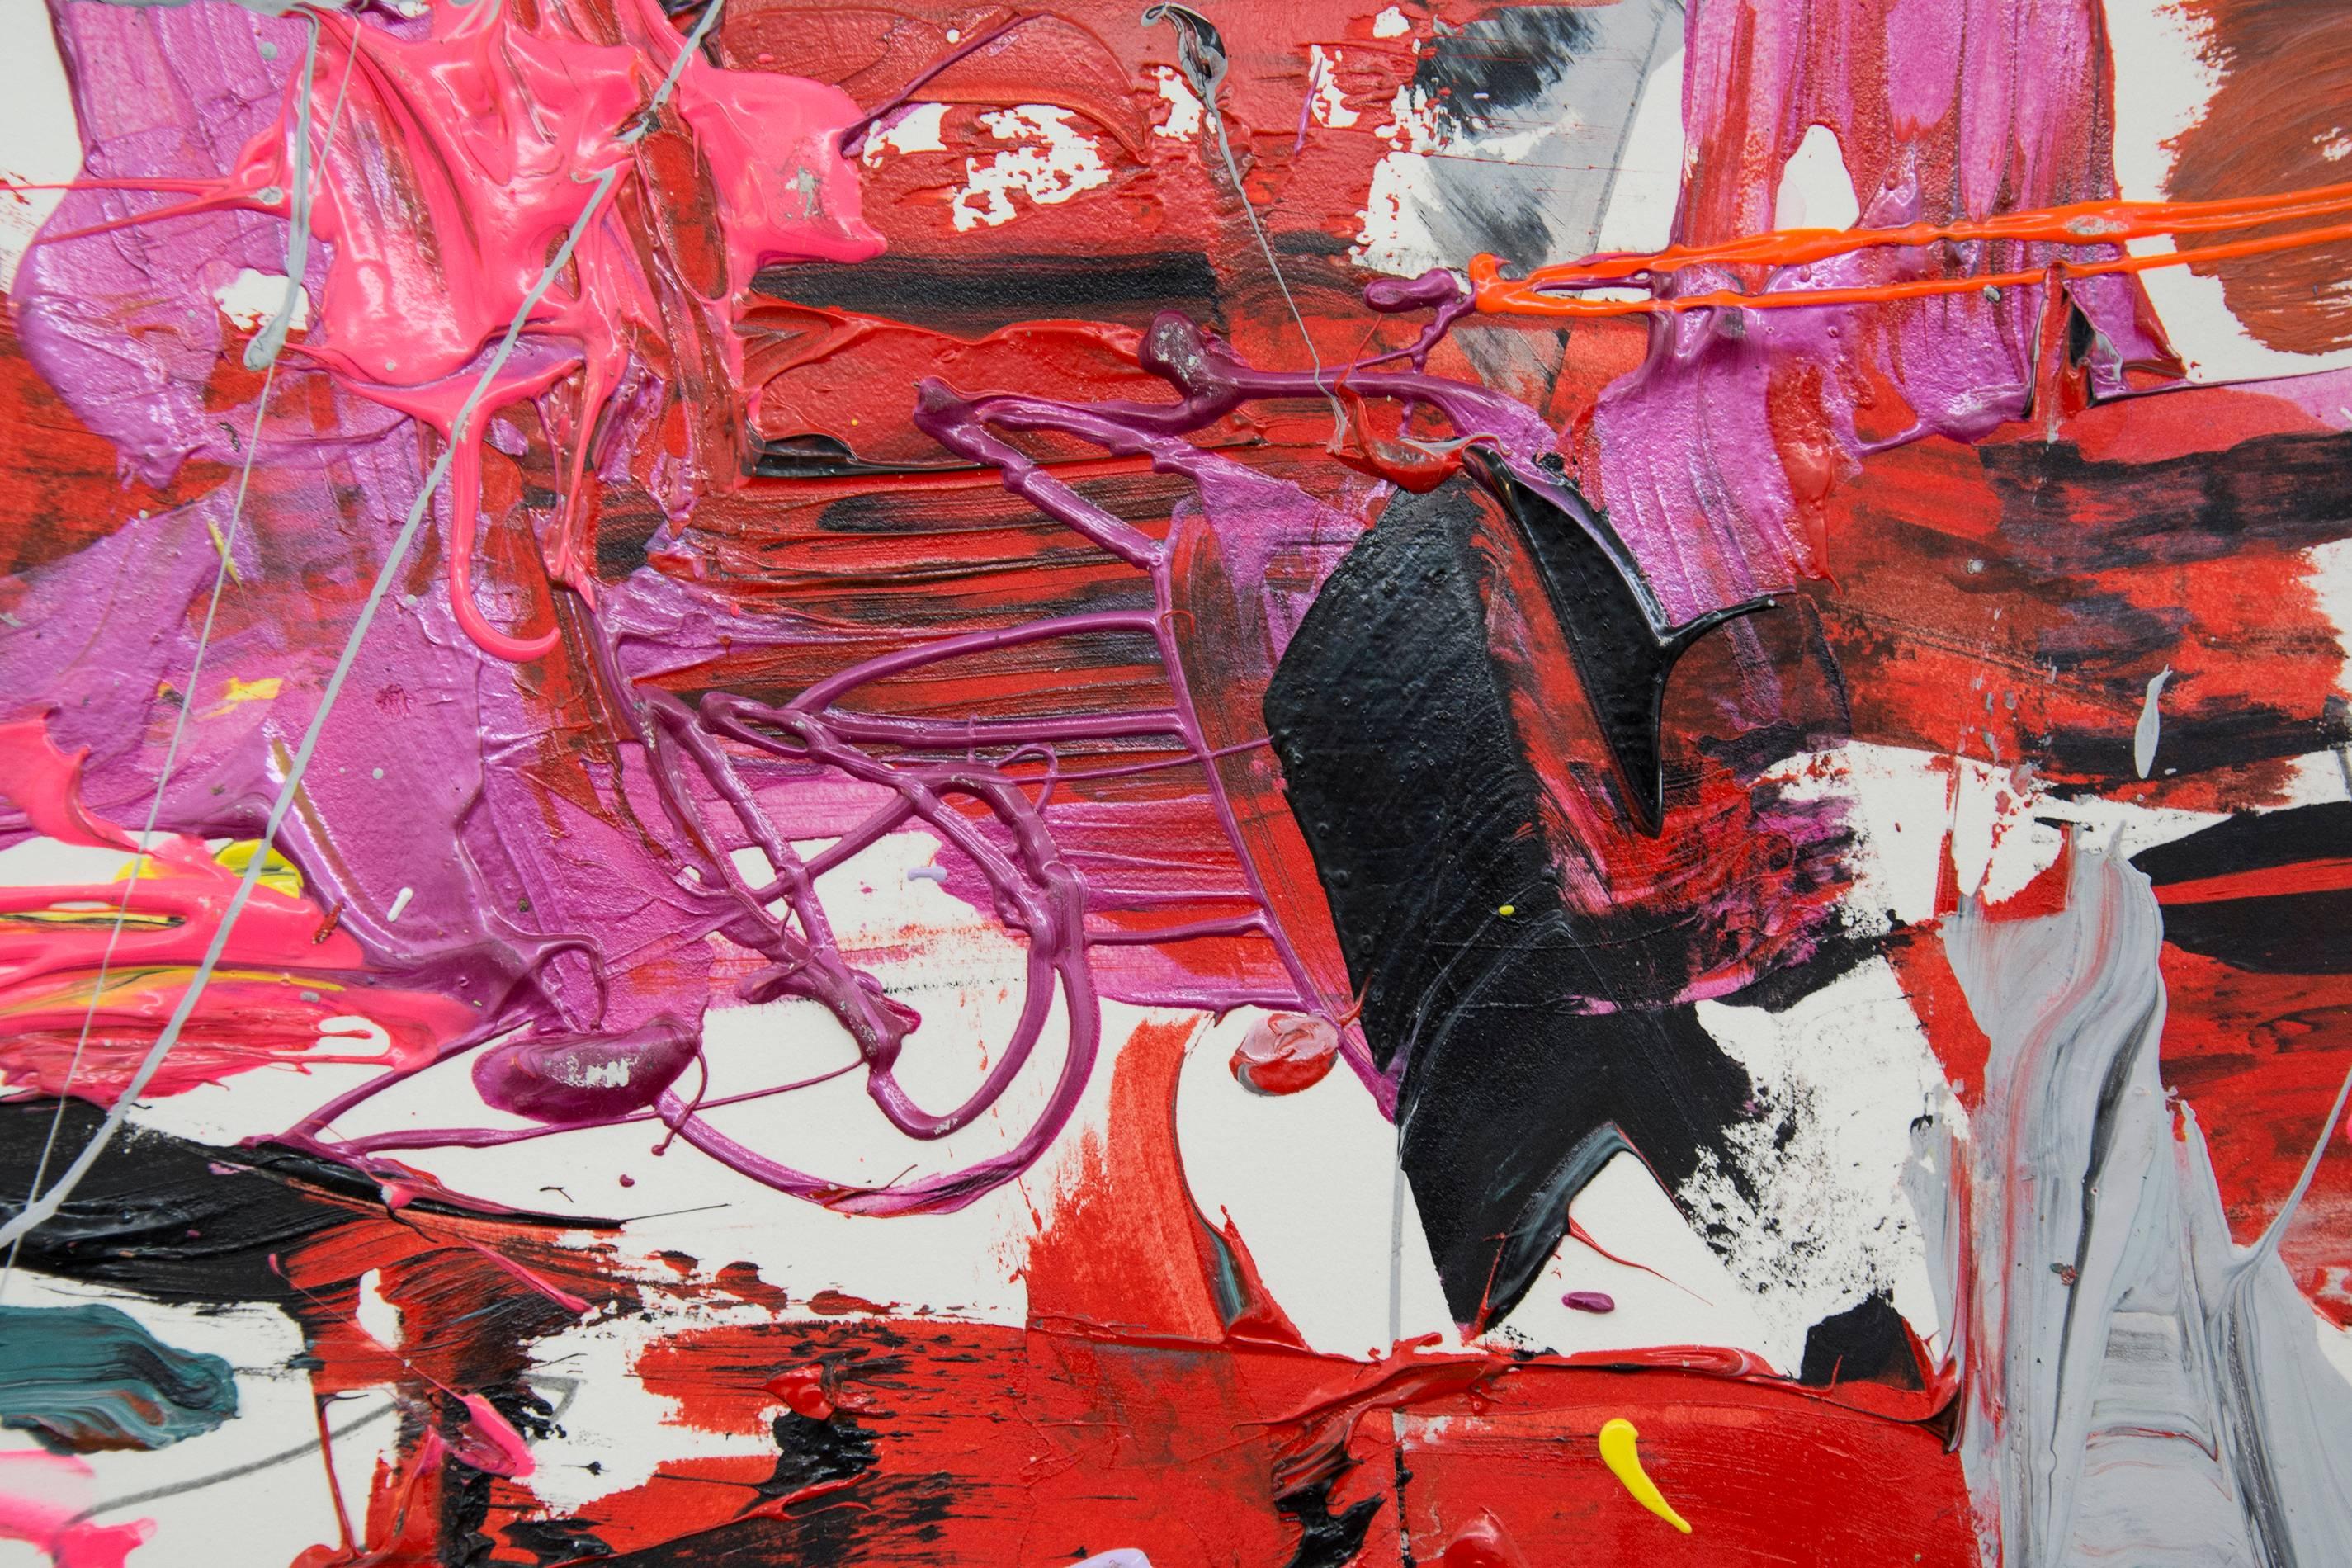 Midnight Surprise - bold, colourful, abstract expressionist, acrylic on paper - Abstract Expressionist Painting by Adam Cohen